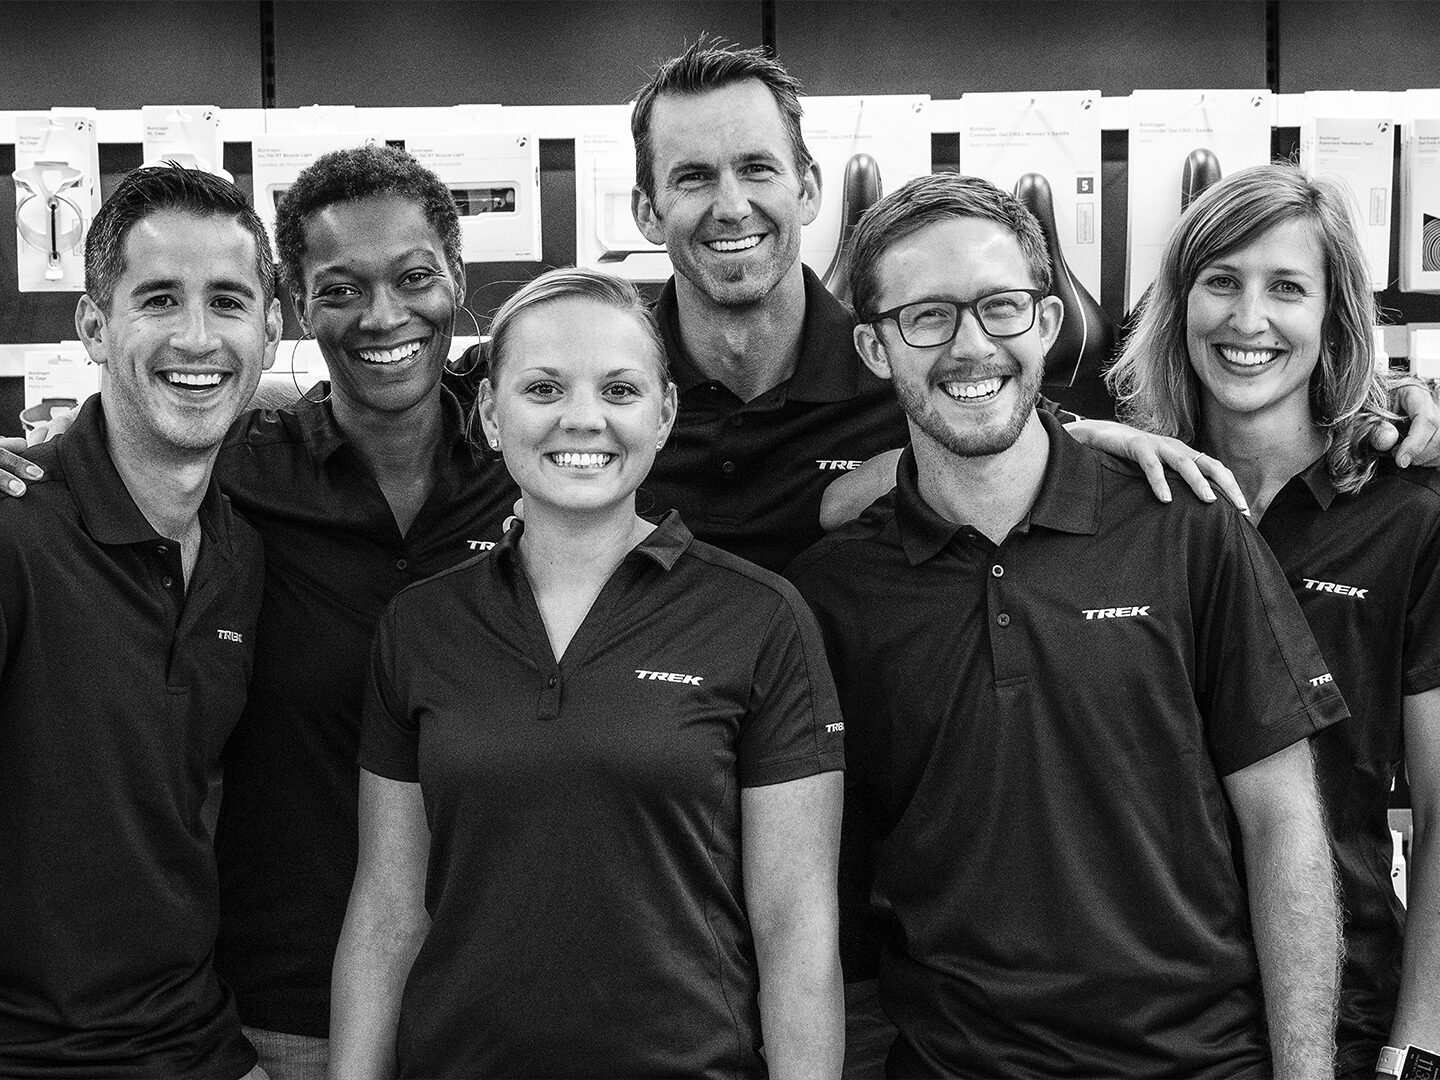 A black and white photo of six Trek employees standing together and smiling in work polos.